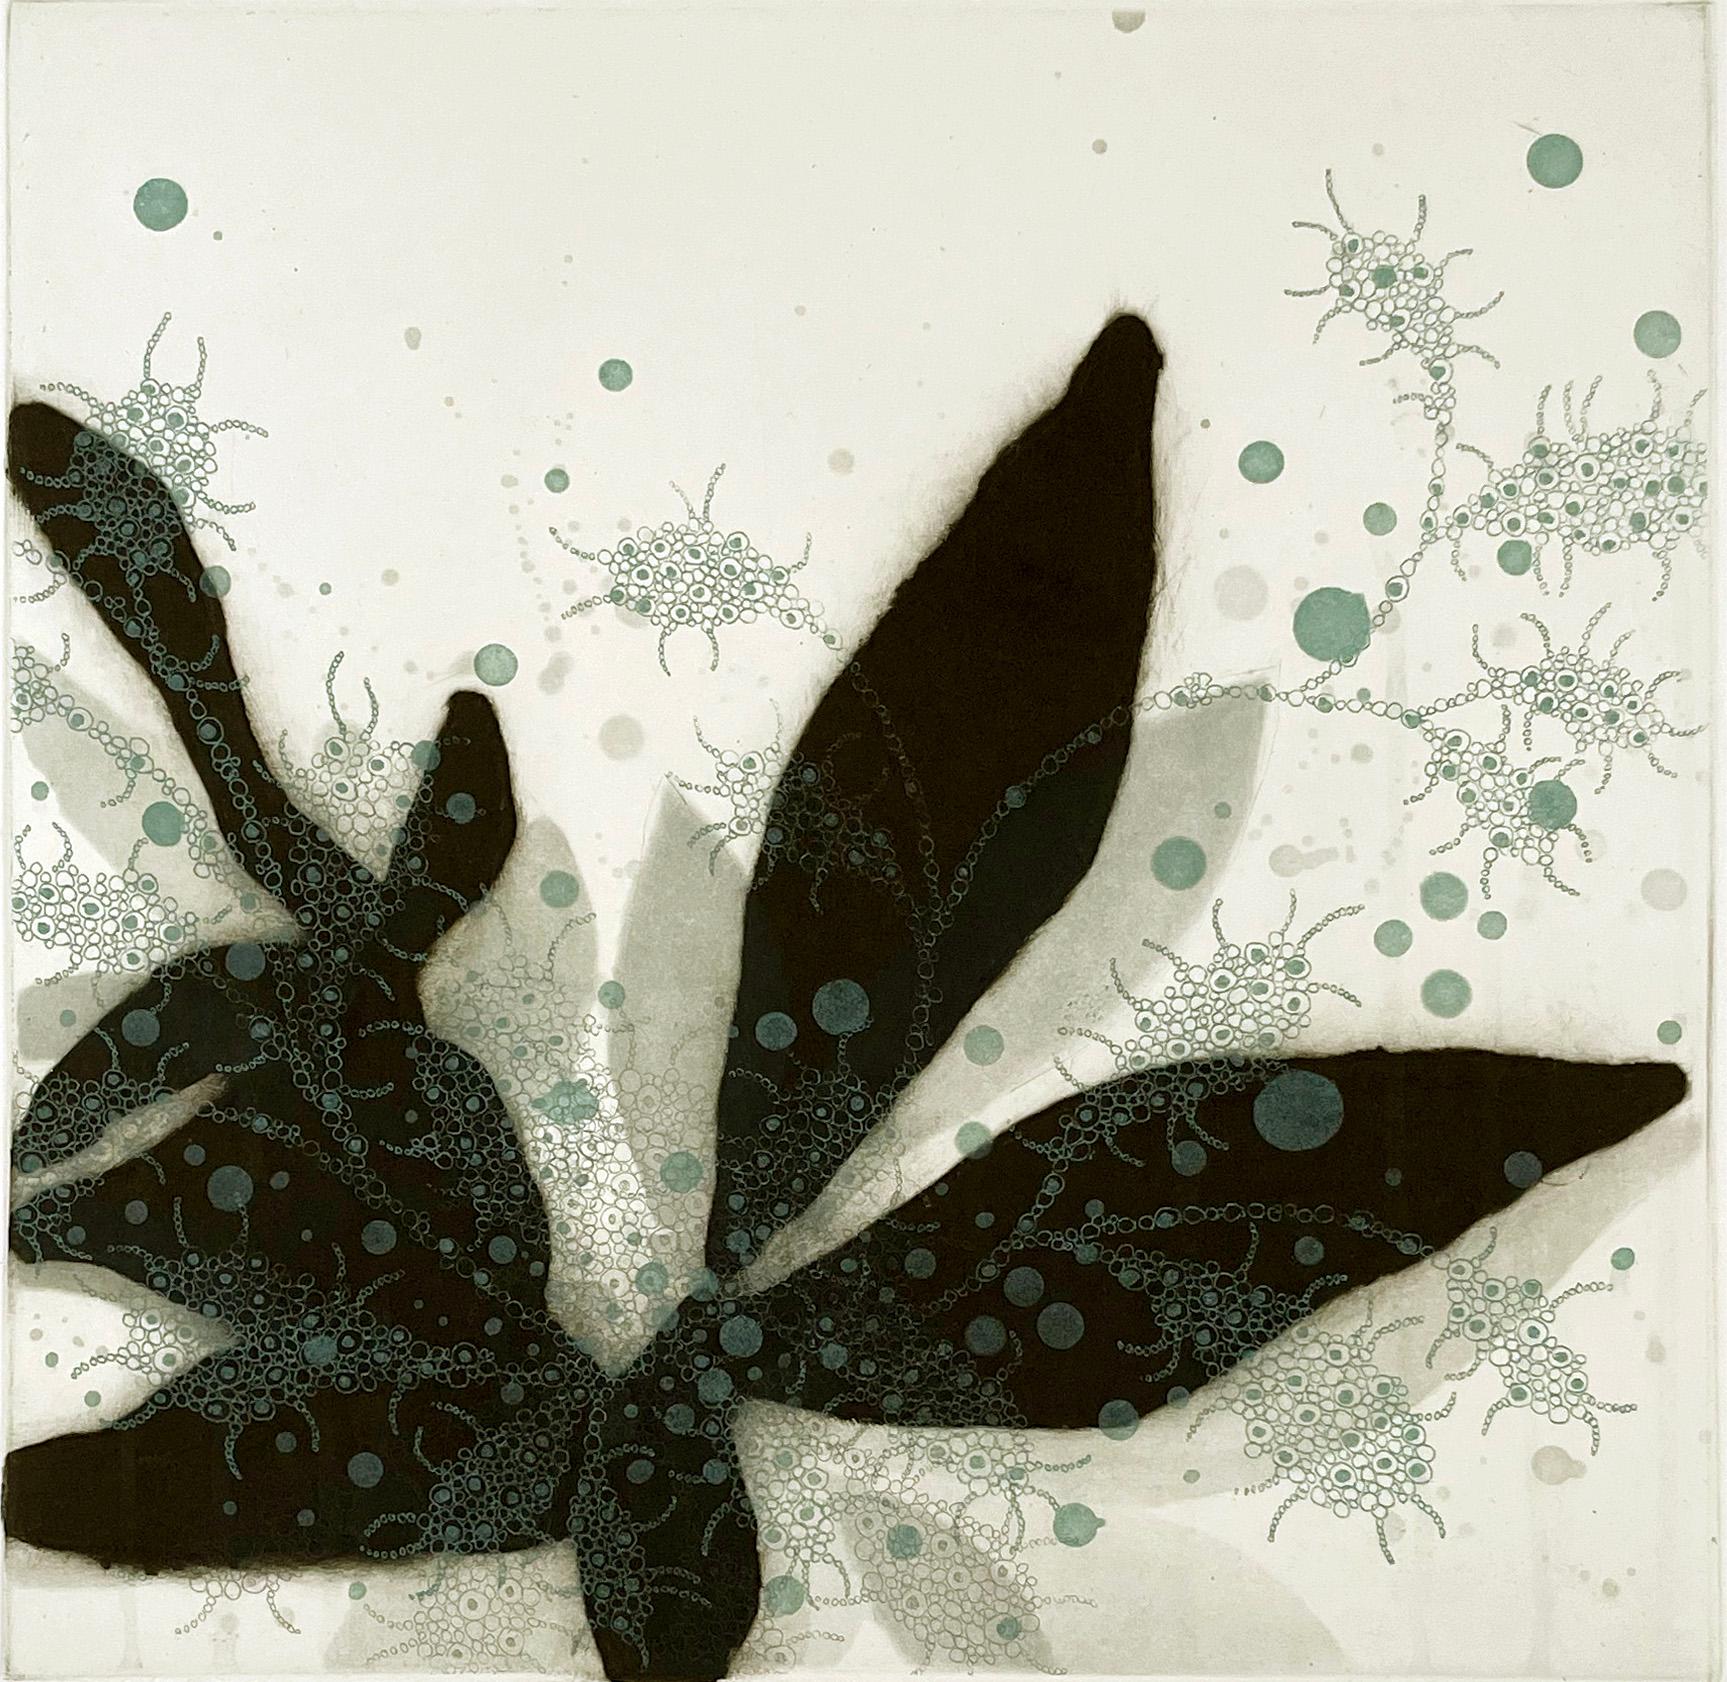 Carborundum and intaglio. Signed and numbered from the edition of 25.  Delicate organic shapes.

Tachibana’s prints take their inspiration from nature, a meditation on the forms and shapes of water, ferns and the basic elements of life.

Seiko